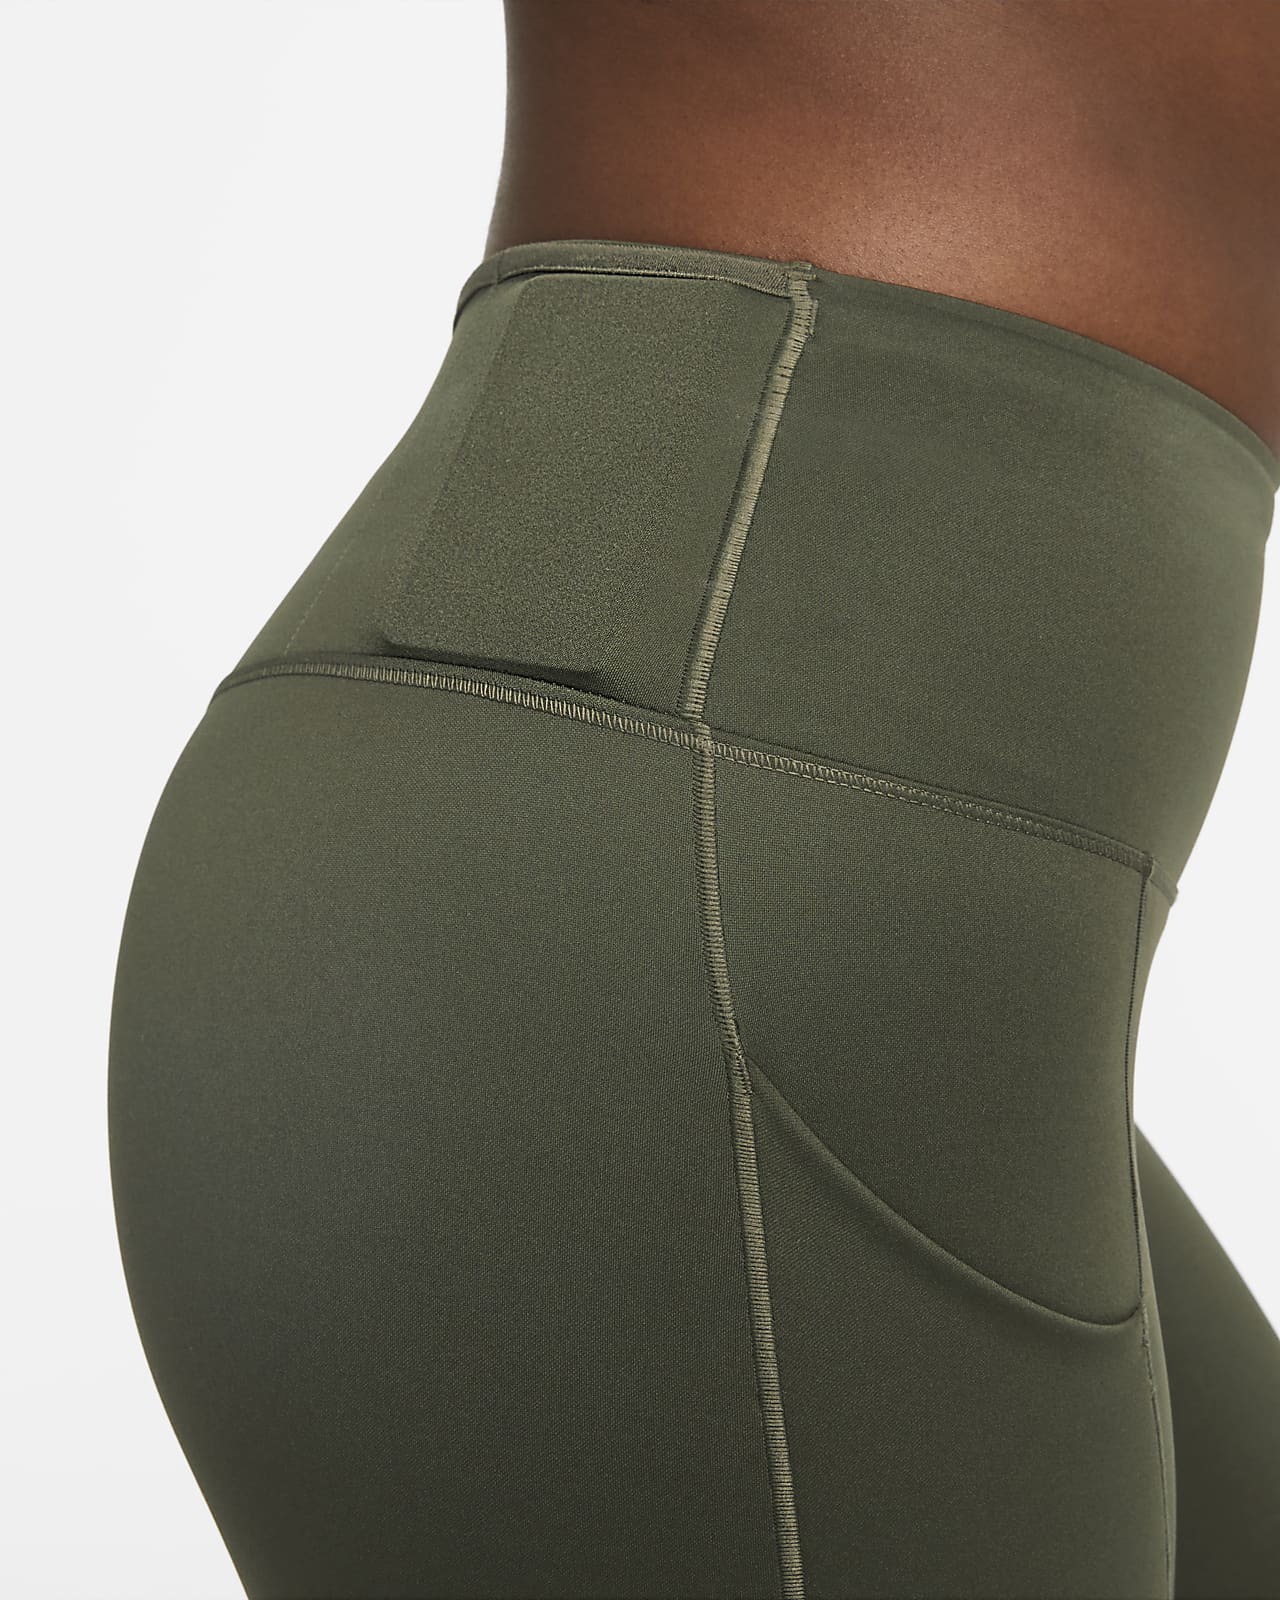 Nike just do it olive green high rise Leggings, Women's Fashion, Activewear  on Carousell